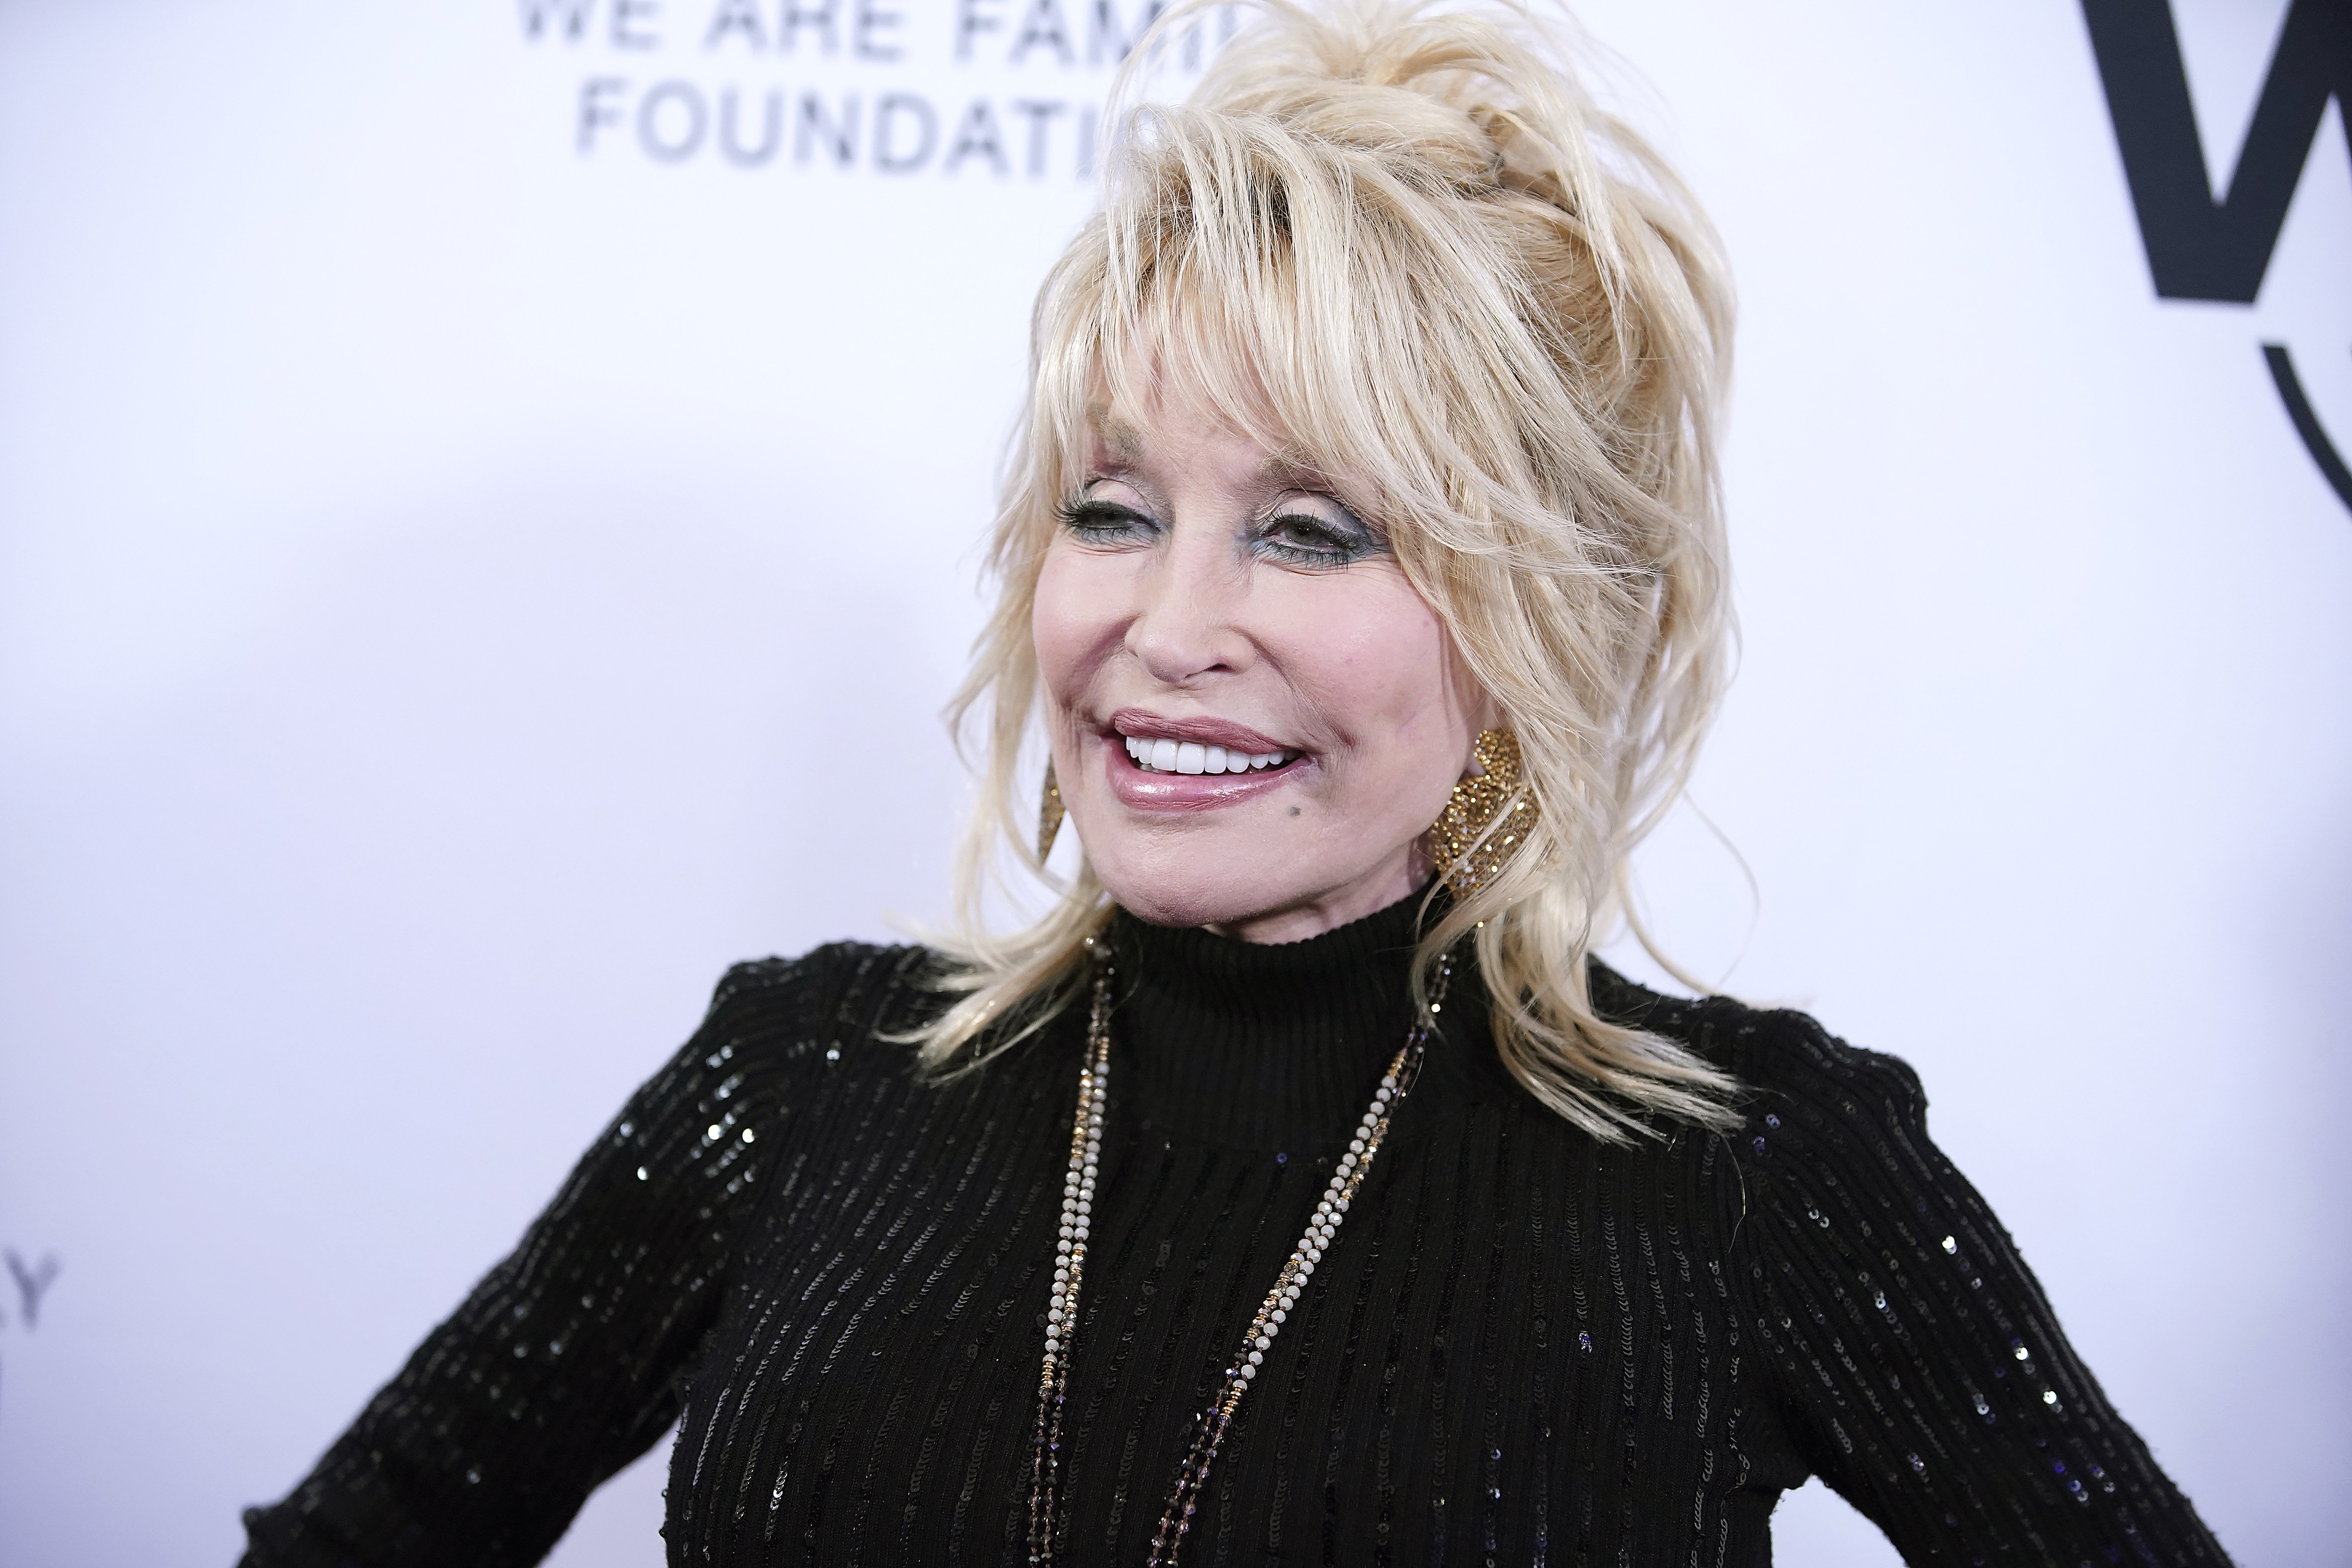 Dolly Parton attends the We Are Family Foundation event at Hammerstein Ballroom on November 5, 2019, in New York City. | Source: Getty Images